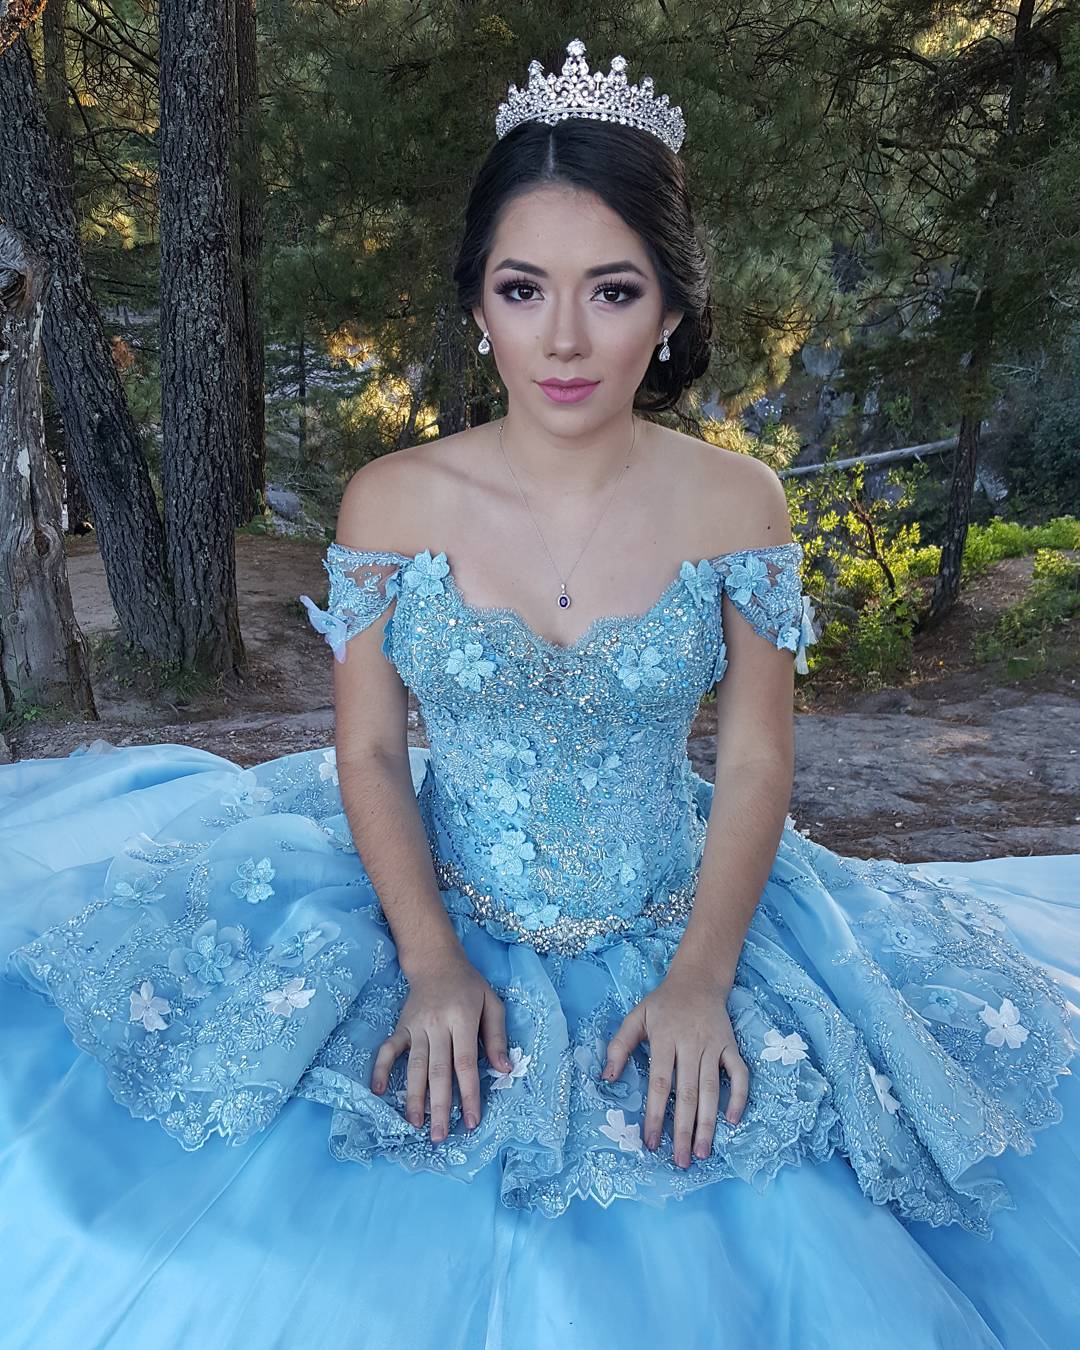 A quinceañera wearing a blue dress, posing with a tiara and makeup.